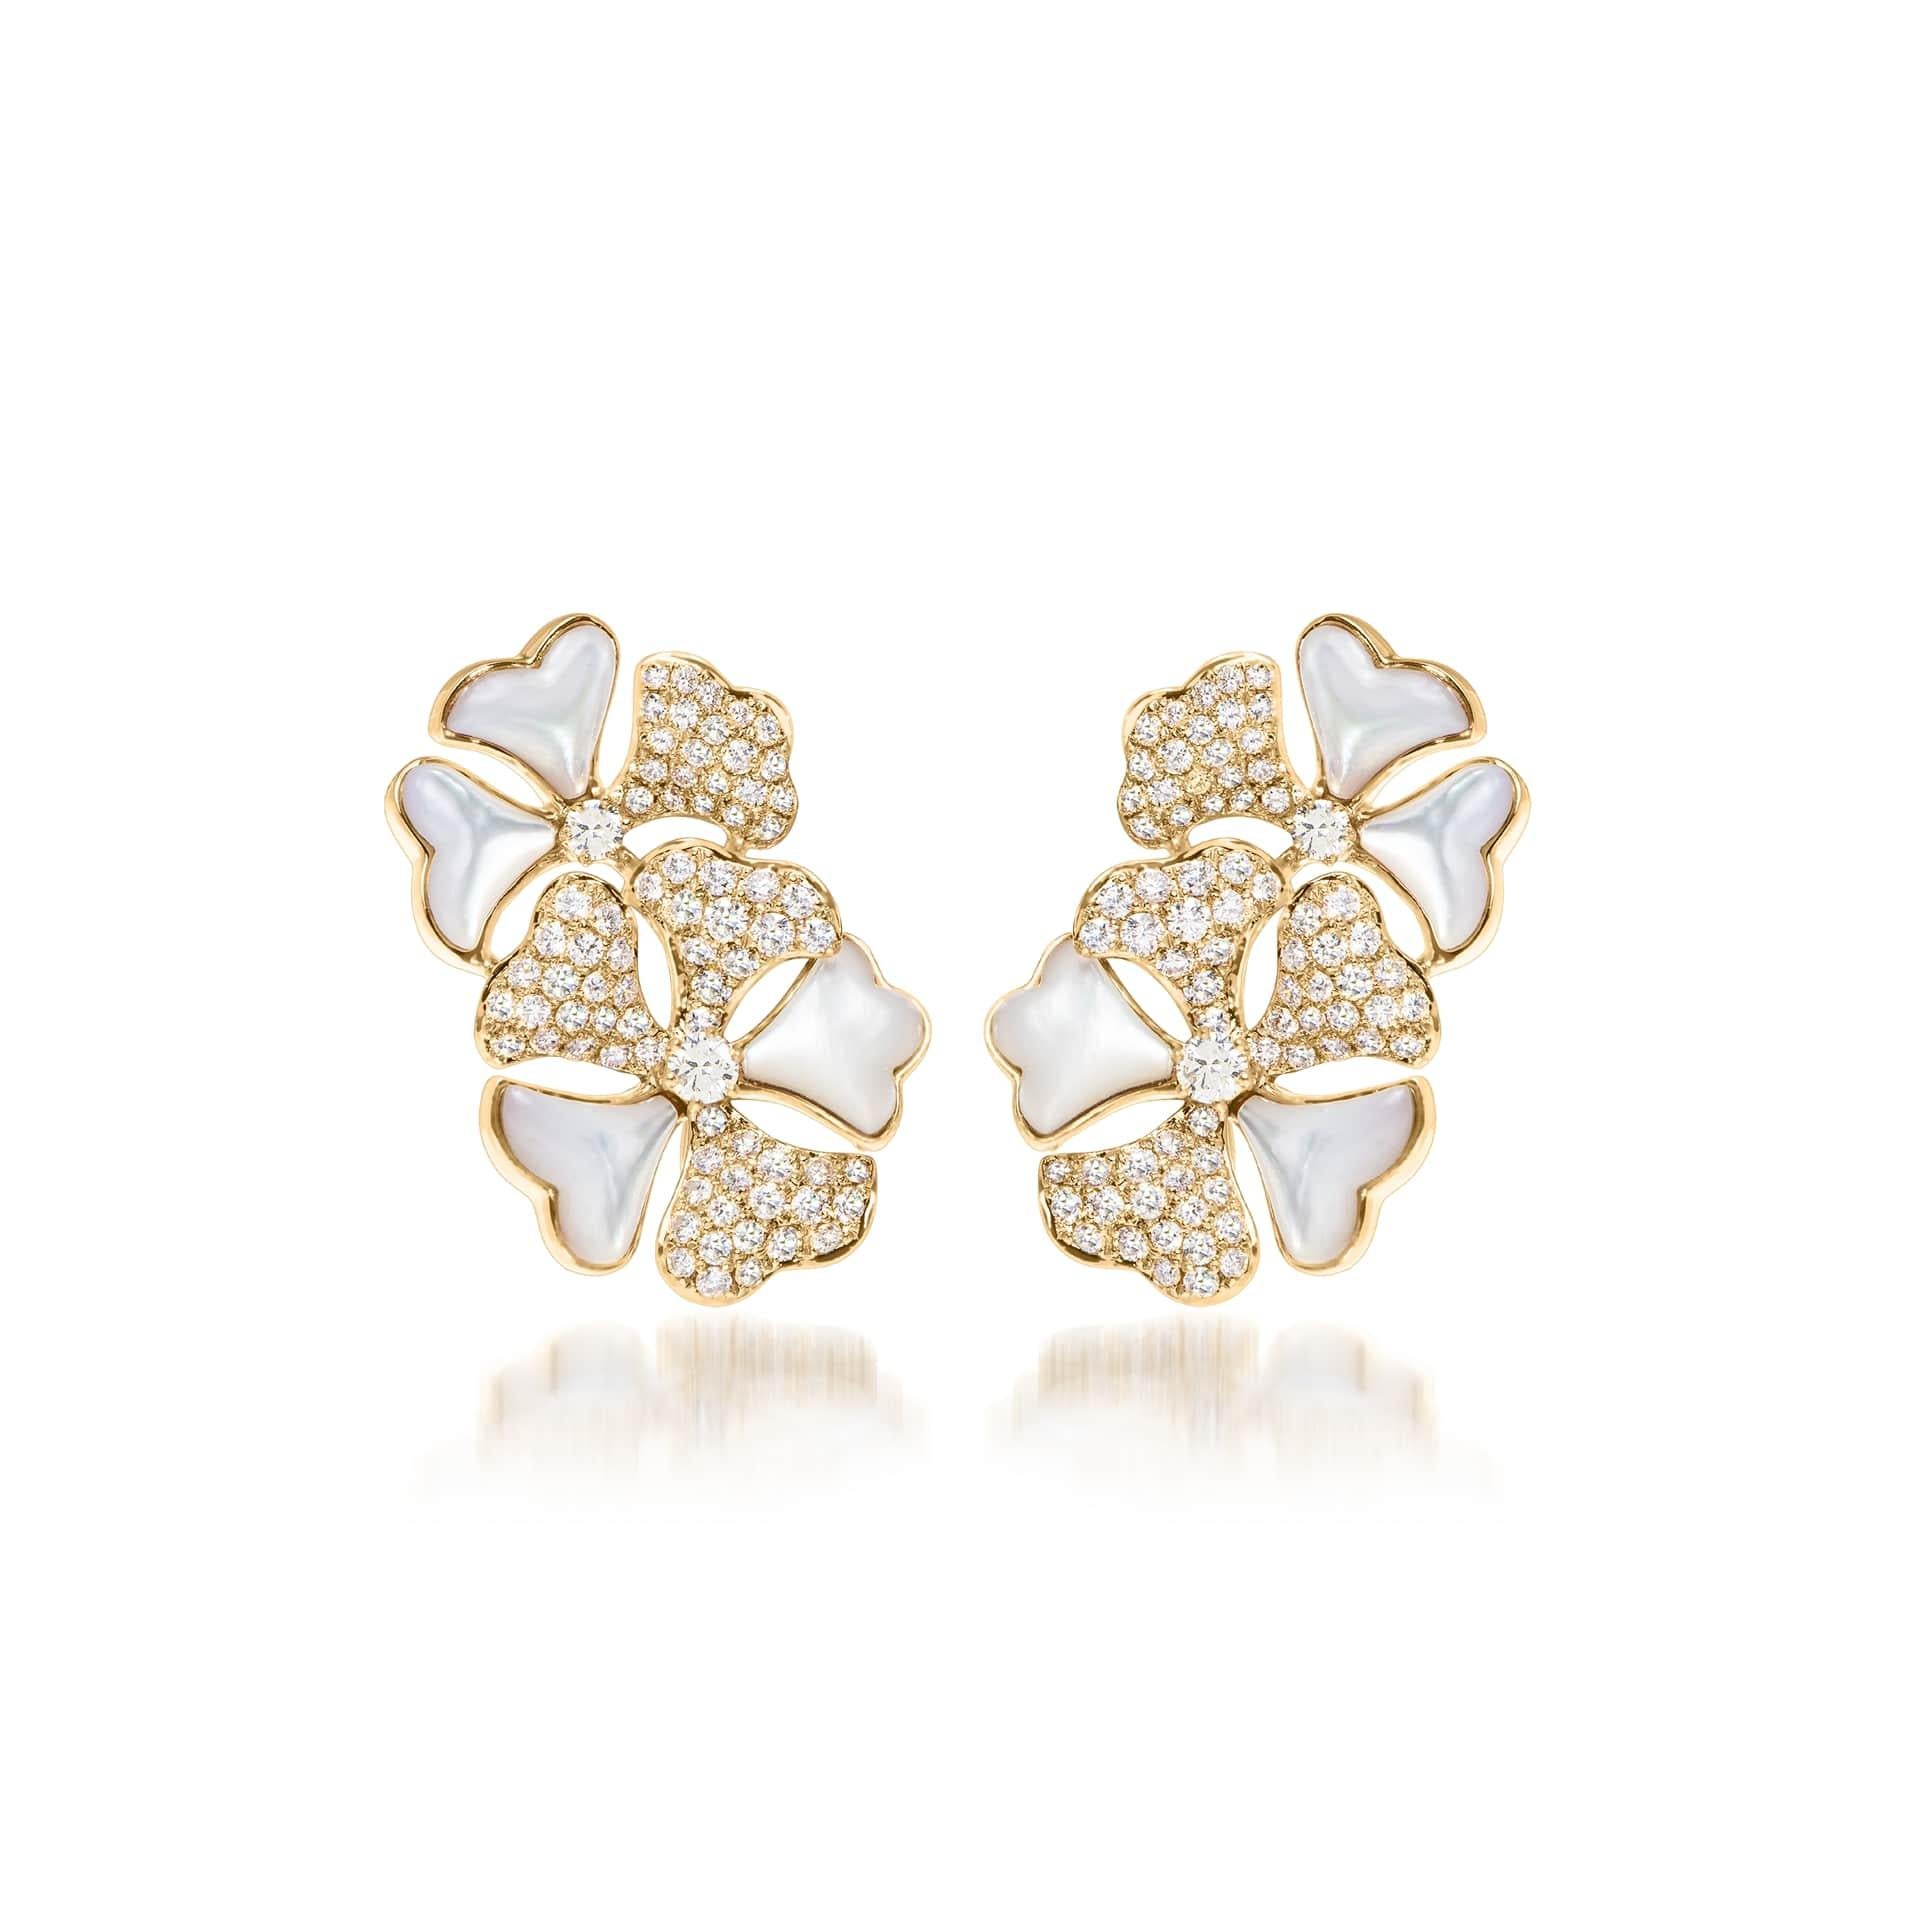 Bloom Diamond and White Mother-of-Pearl Cluster Earrings in 18K White Gold

Inspired by the exquisite petals of the alpine cinquefoil, the Bloom collection contrasts the richness of diamonds and precious metals with the light versatility of this